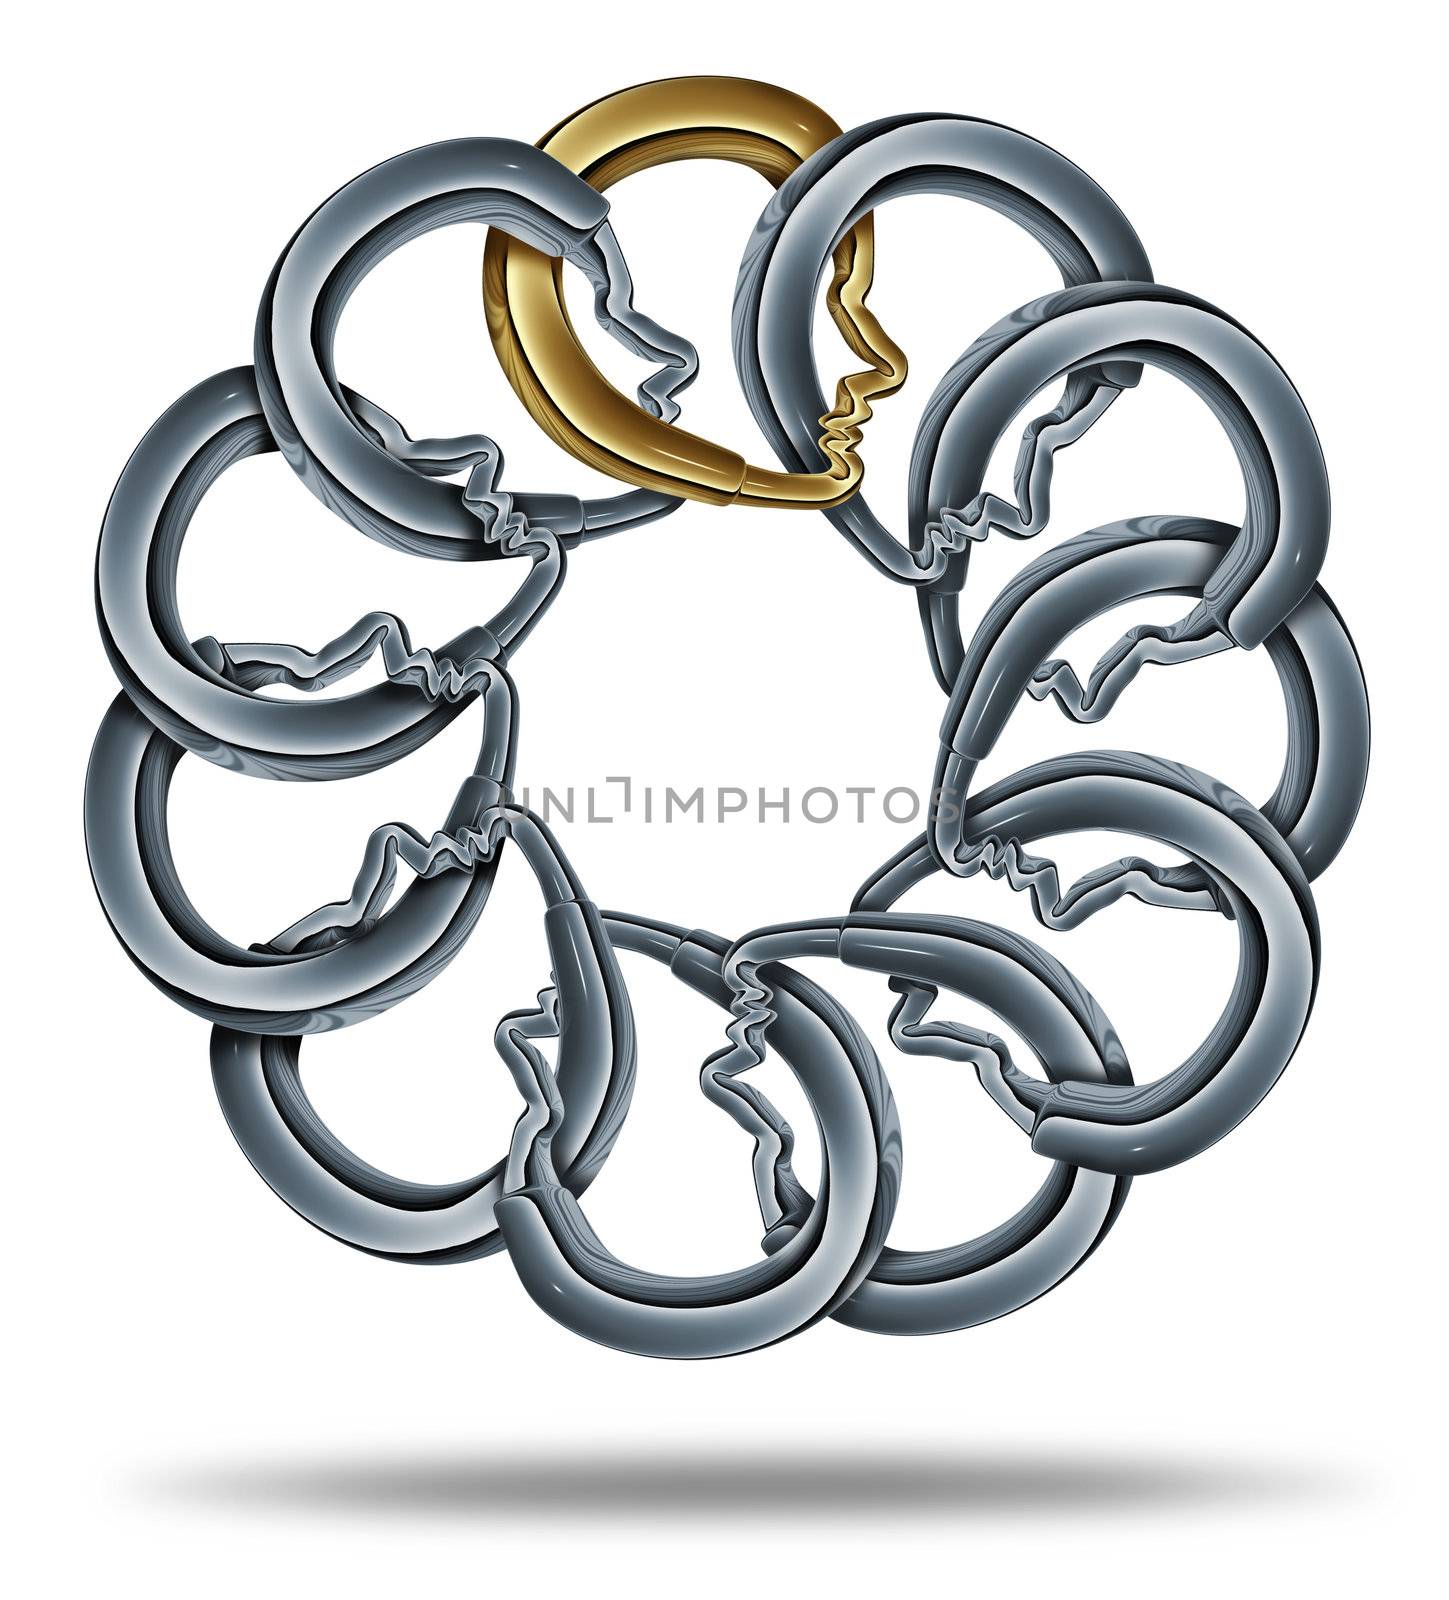 Group link made of gold and silver metal as connected chain links in the shape of a three dimensional human head merged together for a strong business team partnership and financial security.